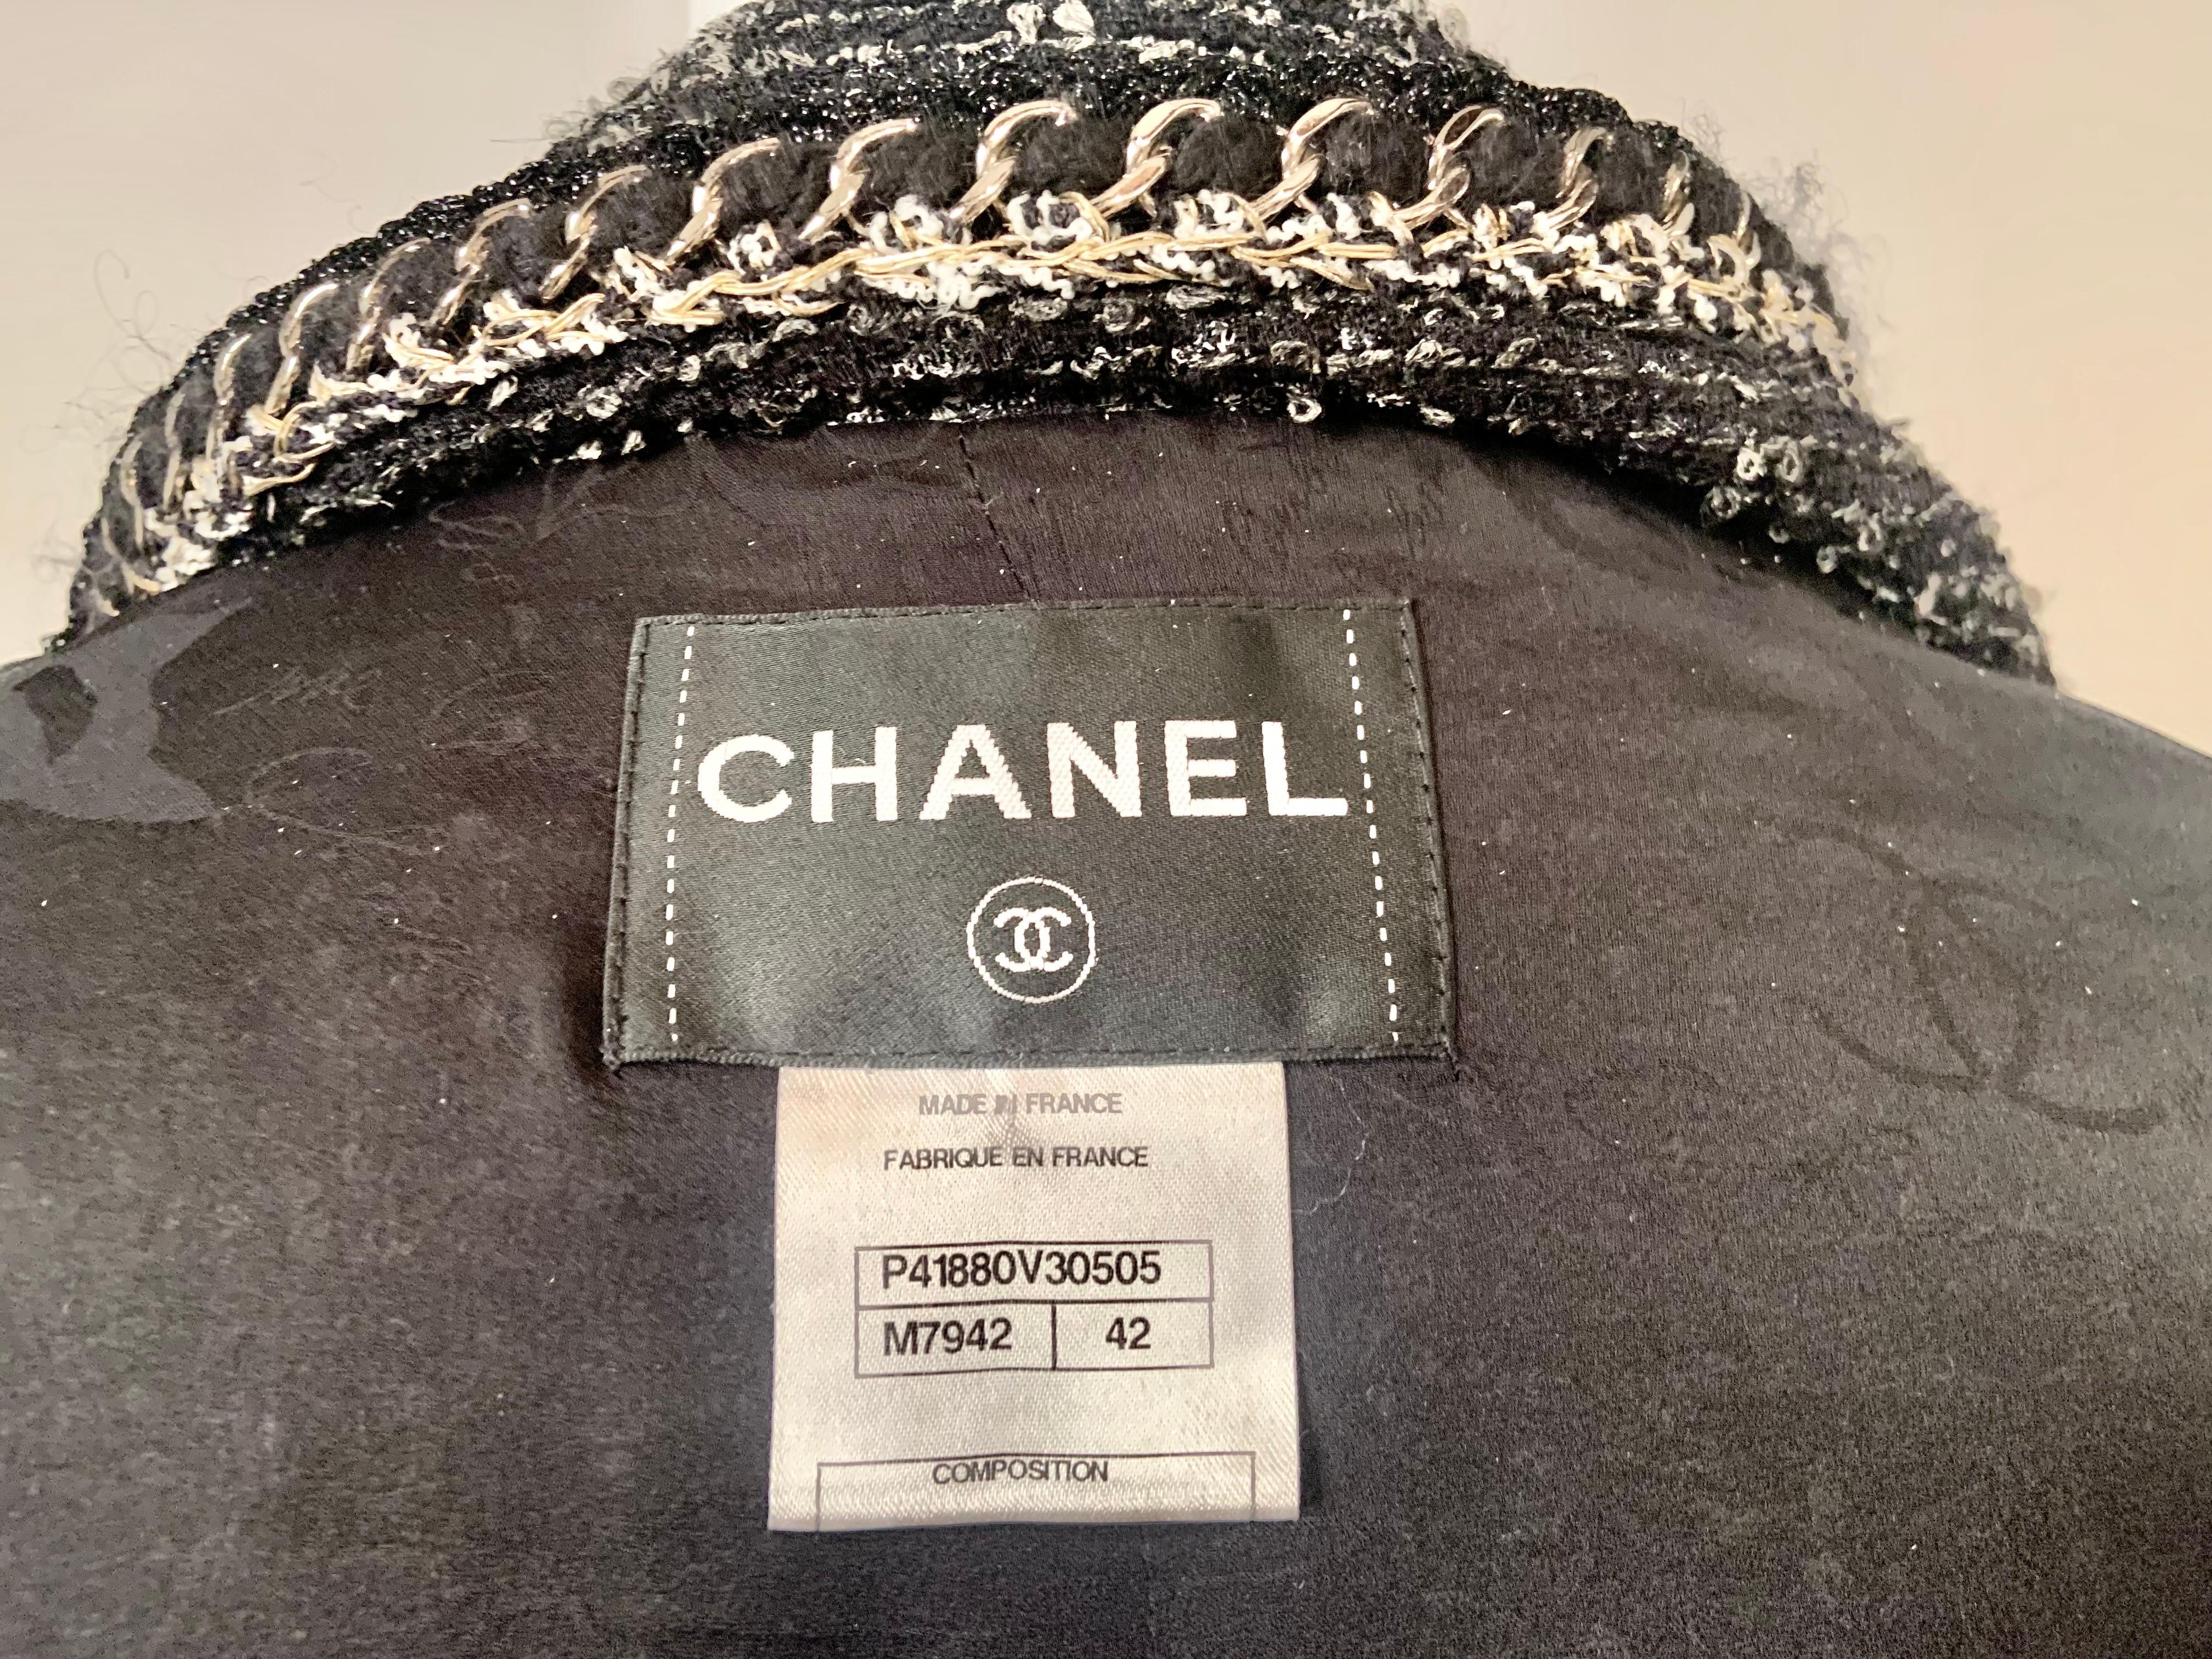 Chanel Chain Trimmed Black and Cream Tweed Jacket or Short Coat 7